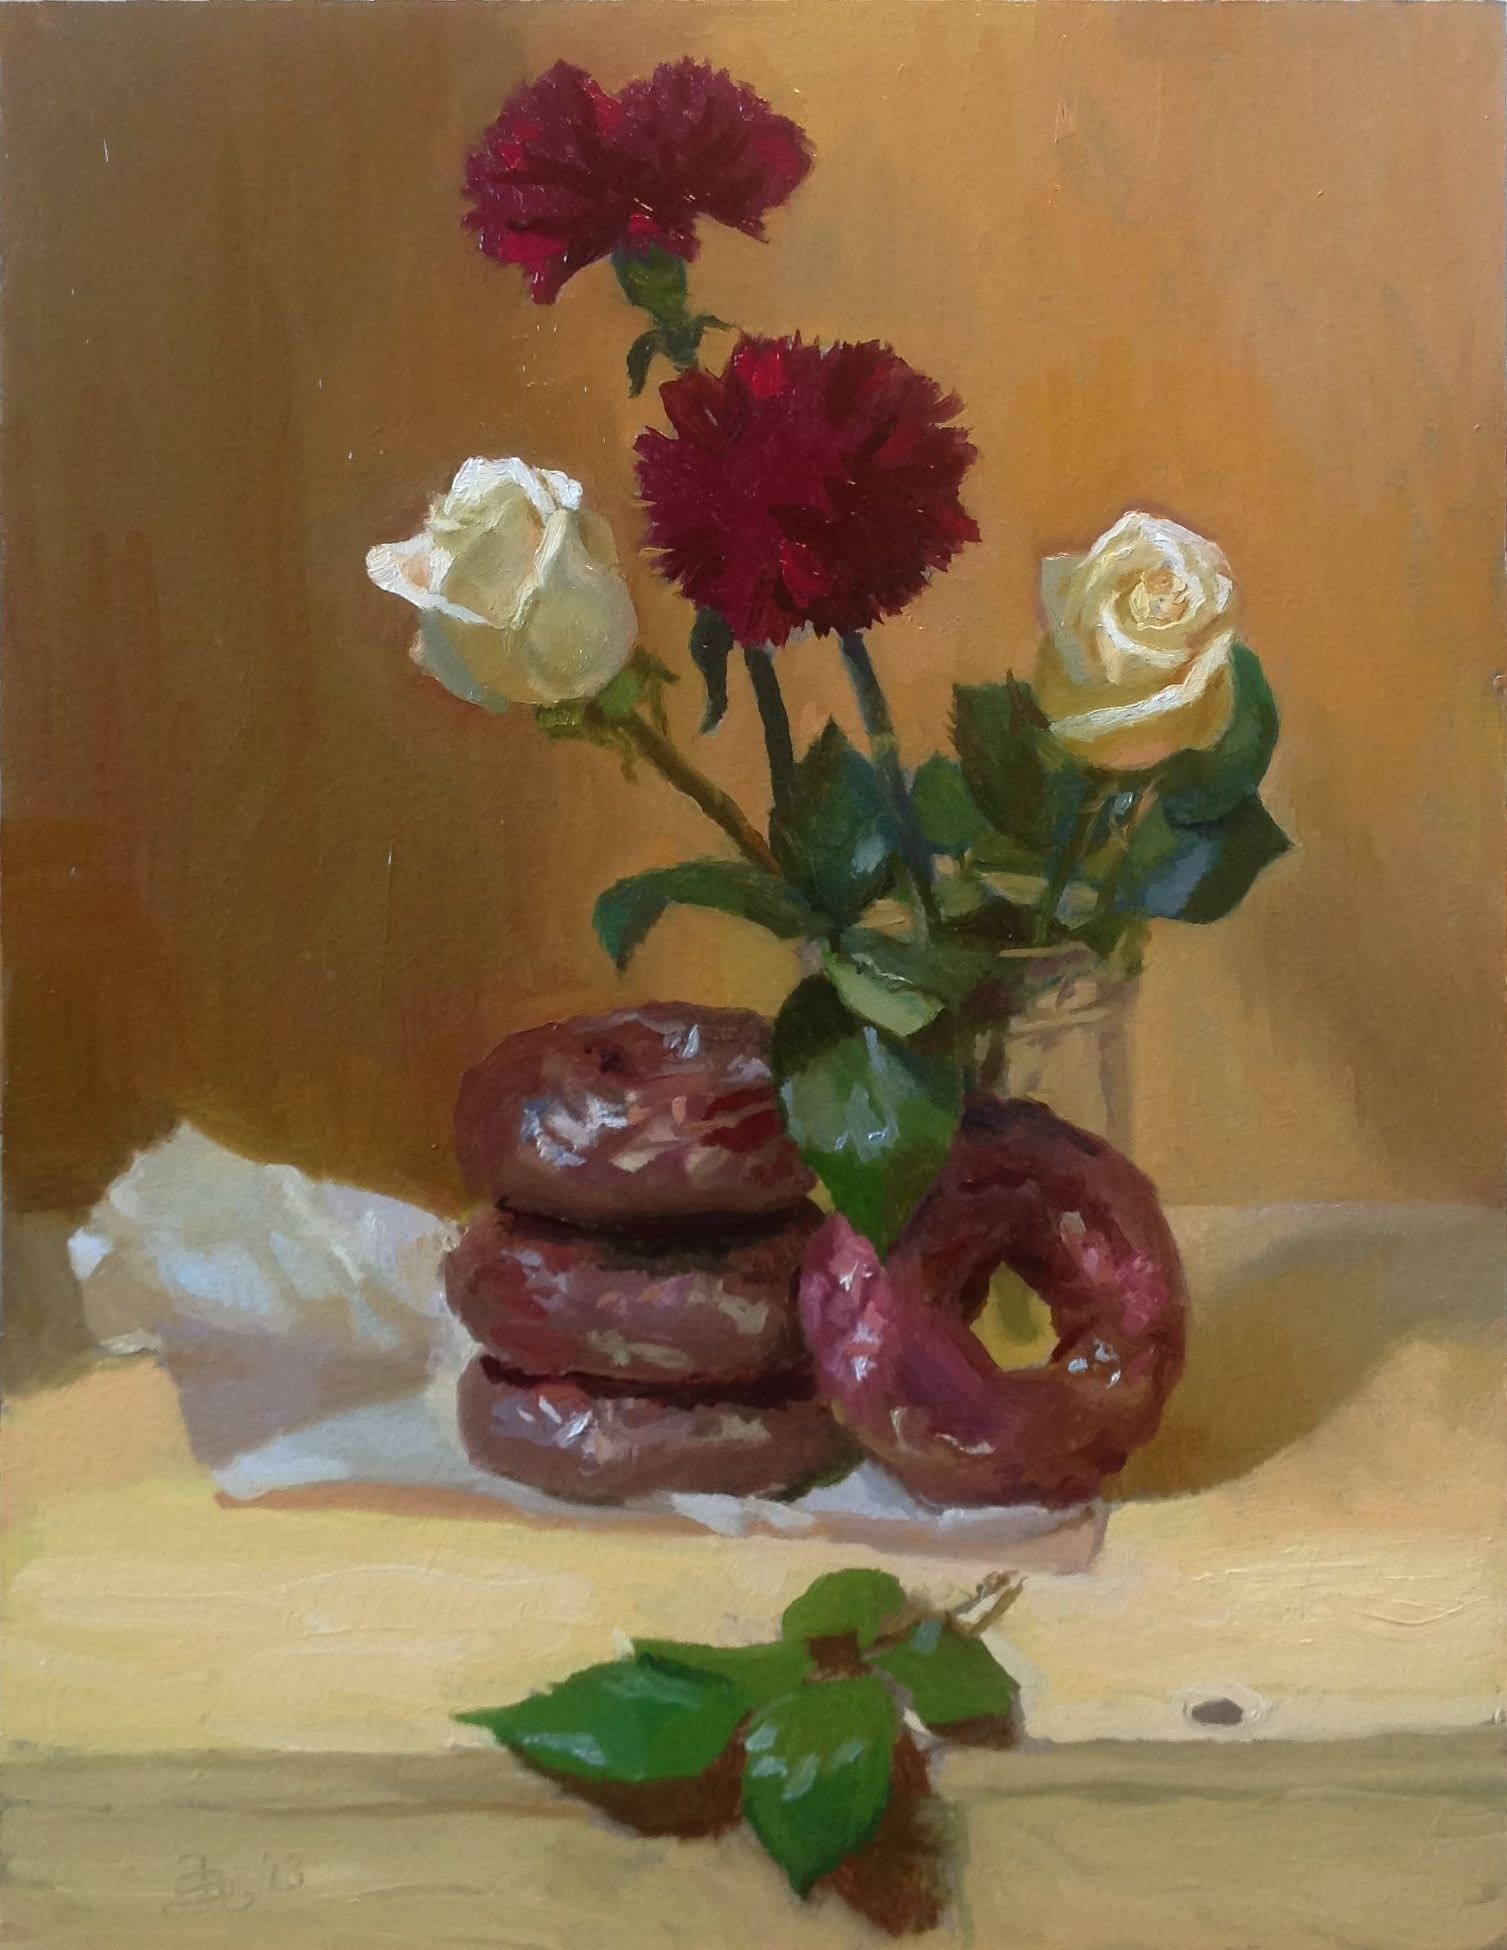 Red Velvet Donuts, Roses and Carnations
14x11 inches oil on panel 2013